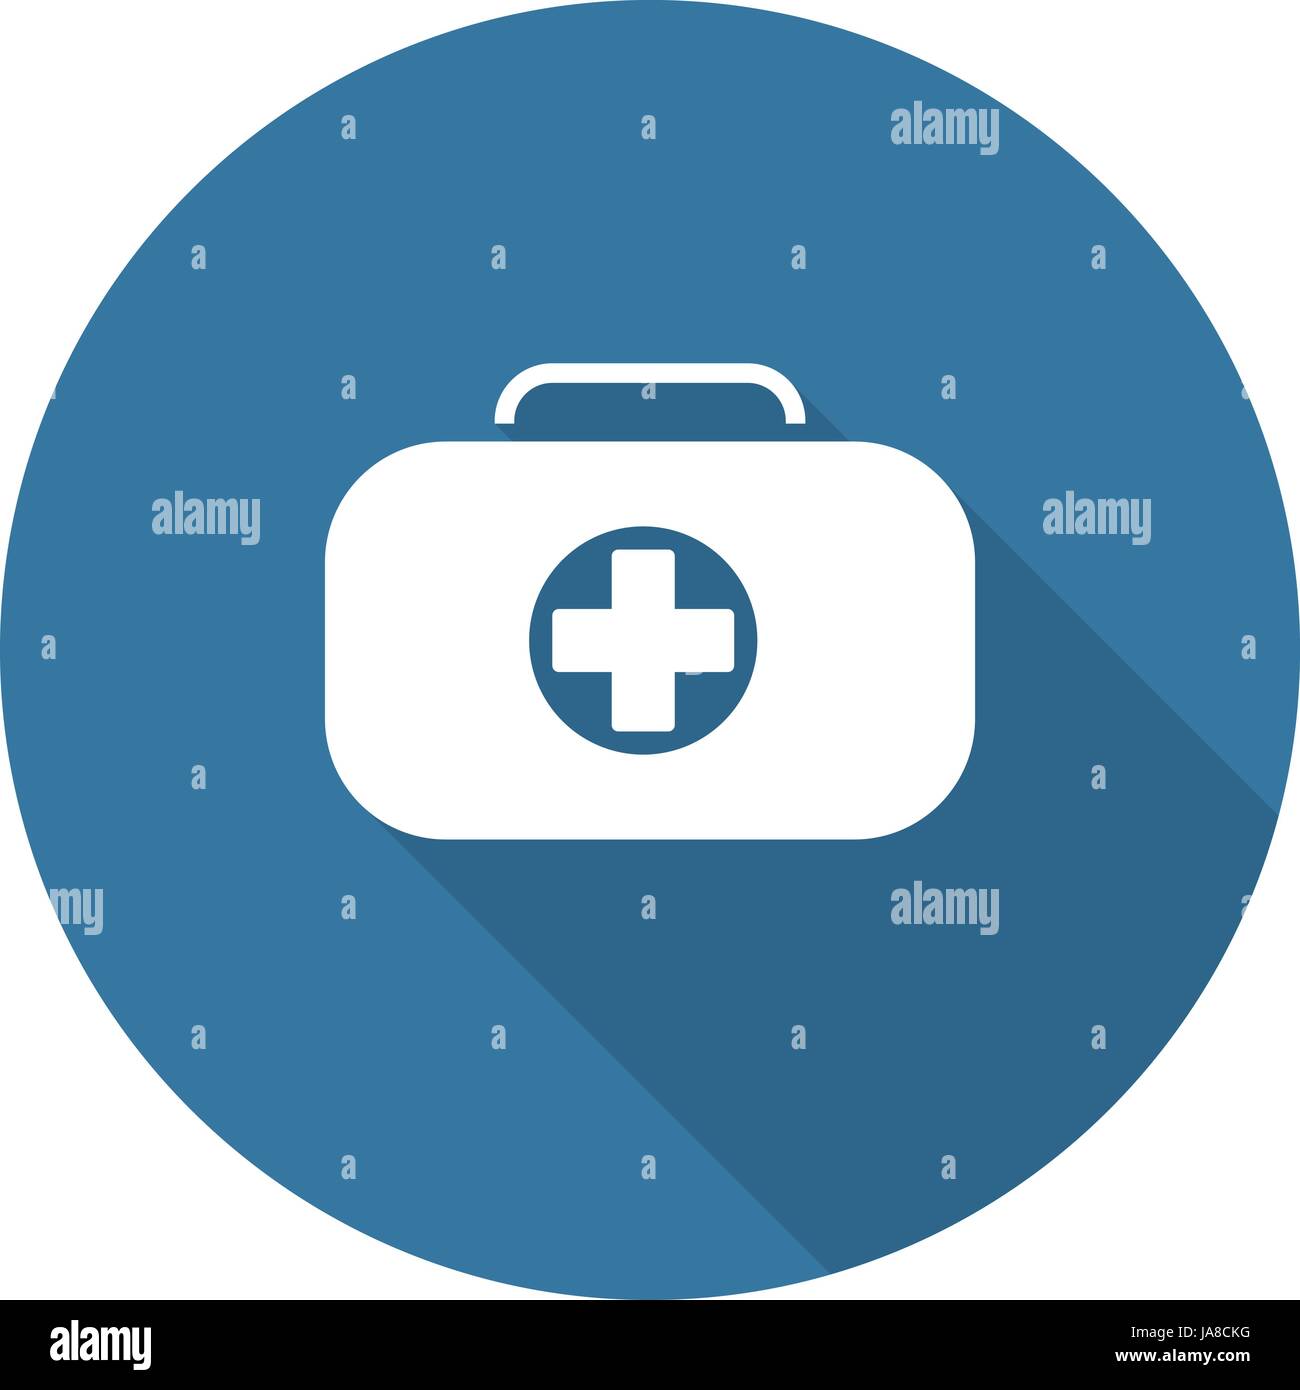 First Aid Kit Symbol and Medical Services Icon. Flat Design. Stock Vector